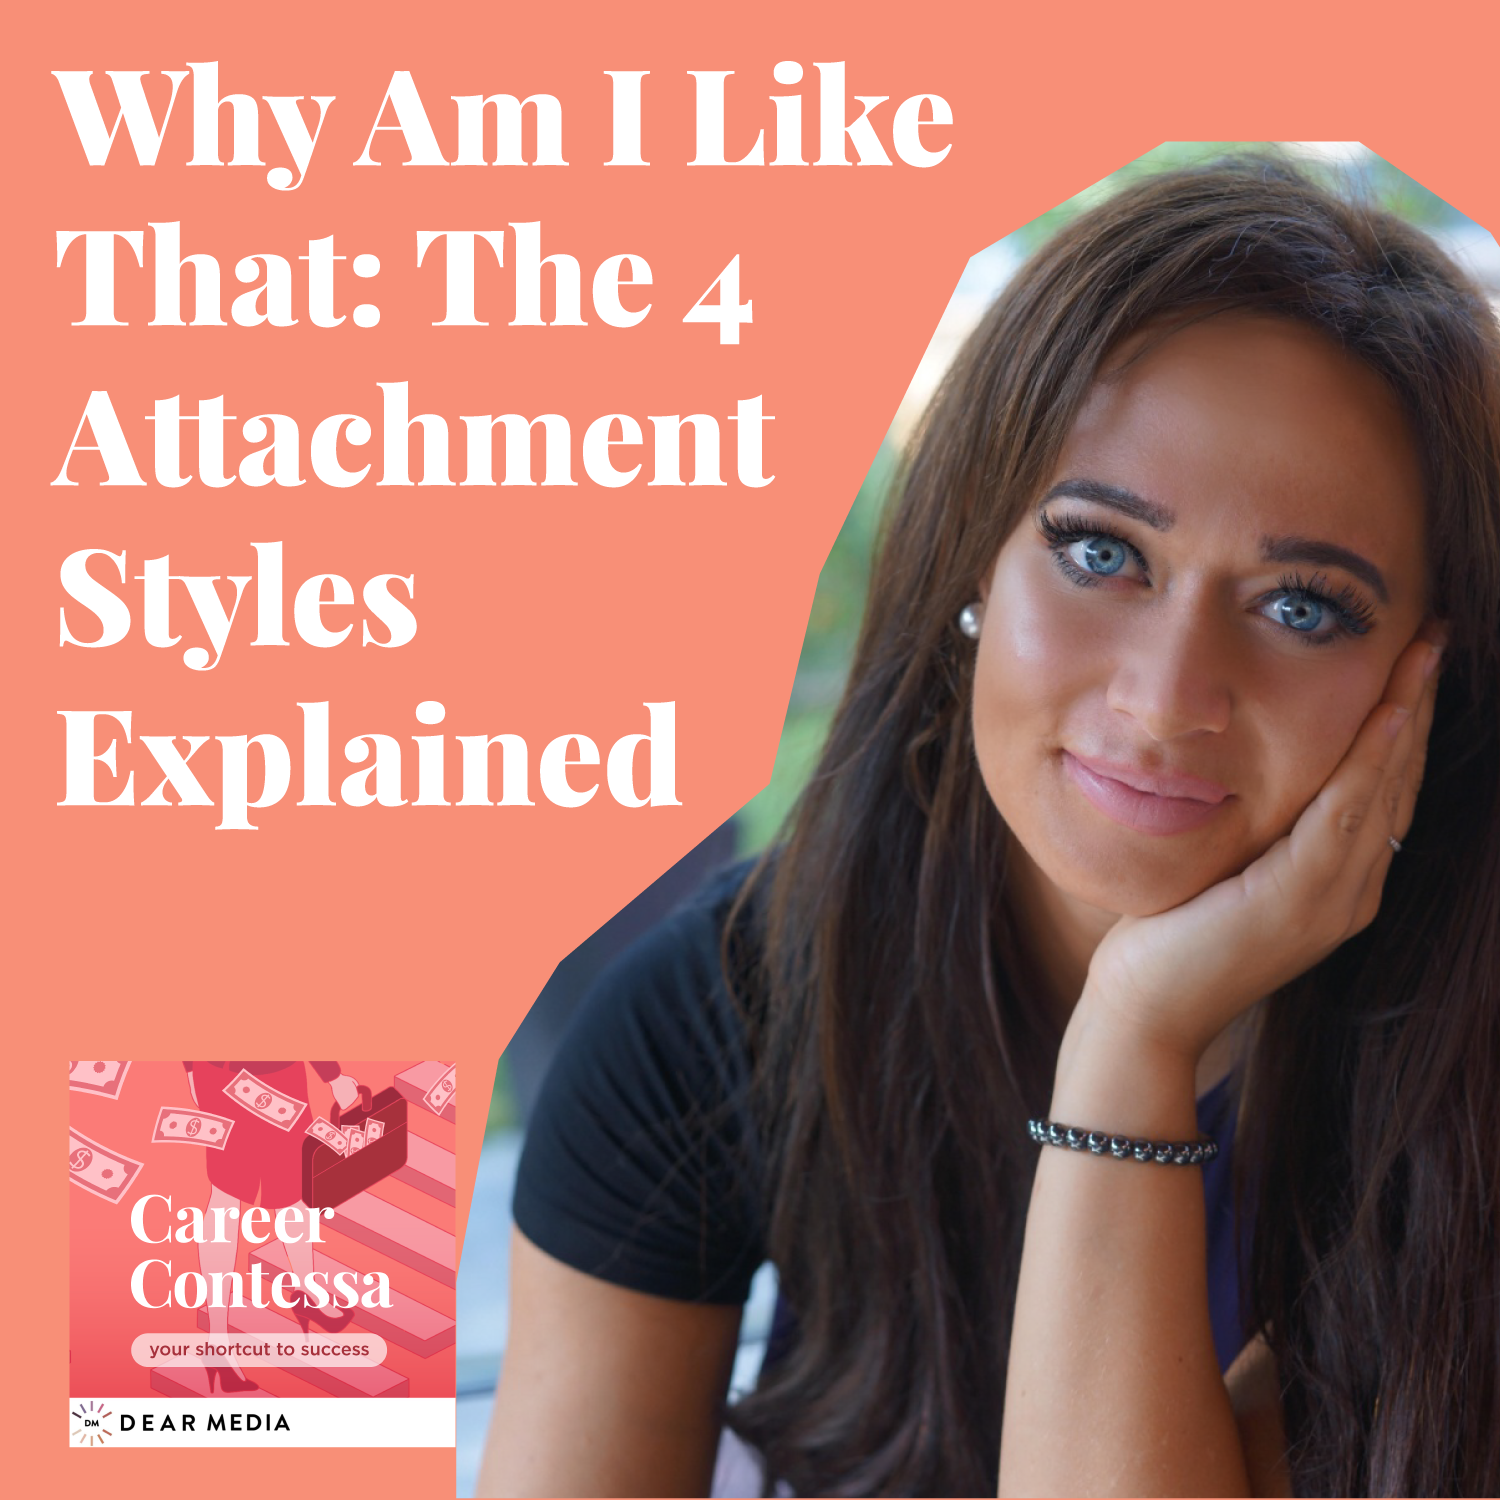 Why Am I Like That: The 4 Attachment Styles Explained Image